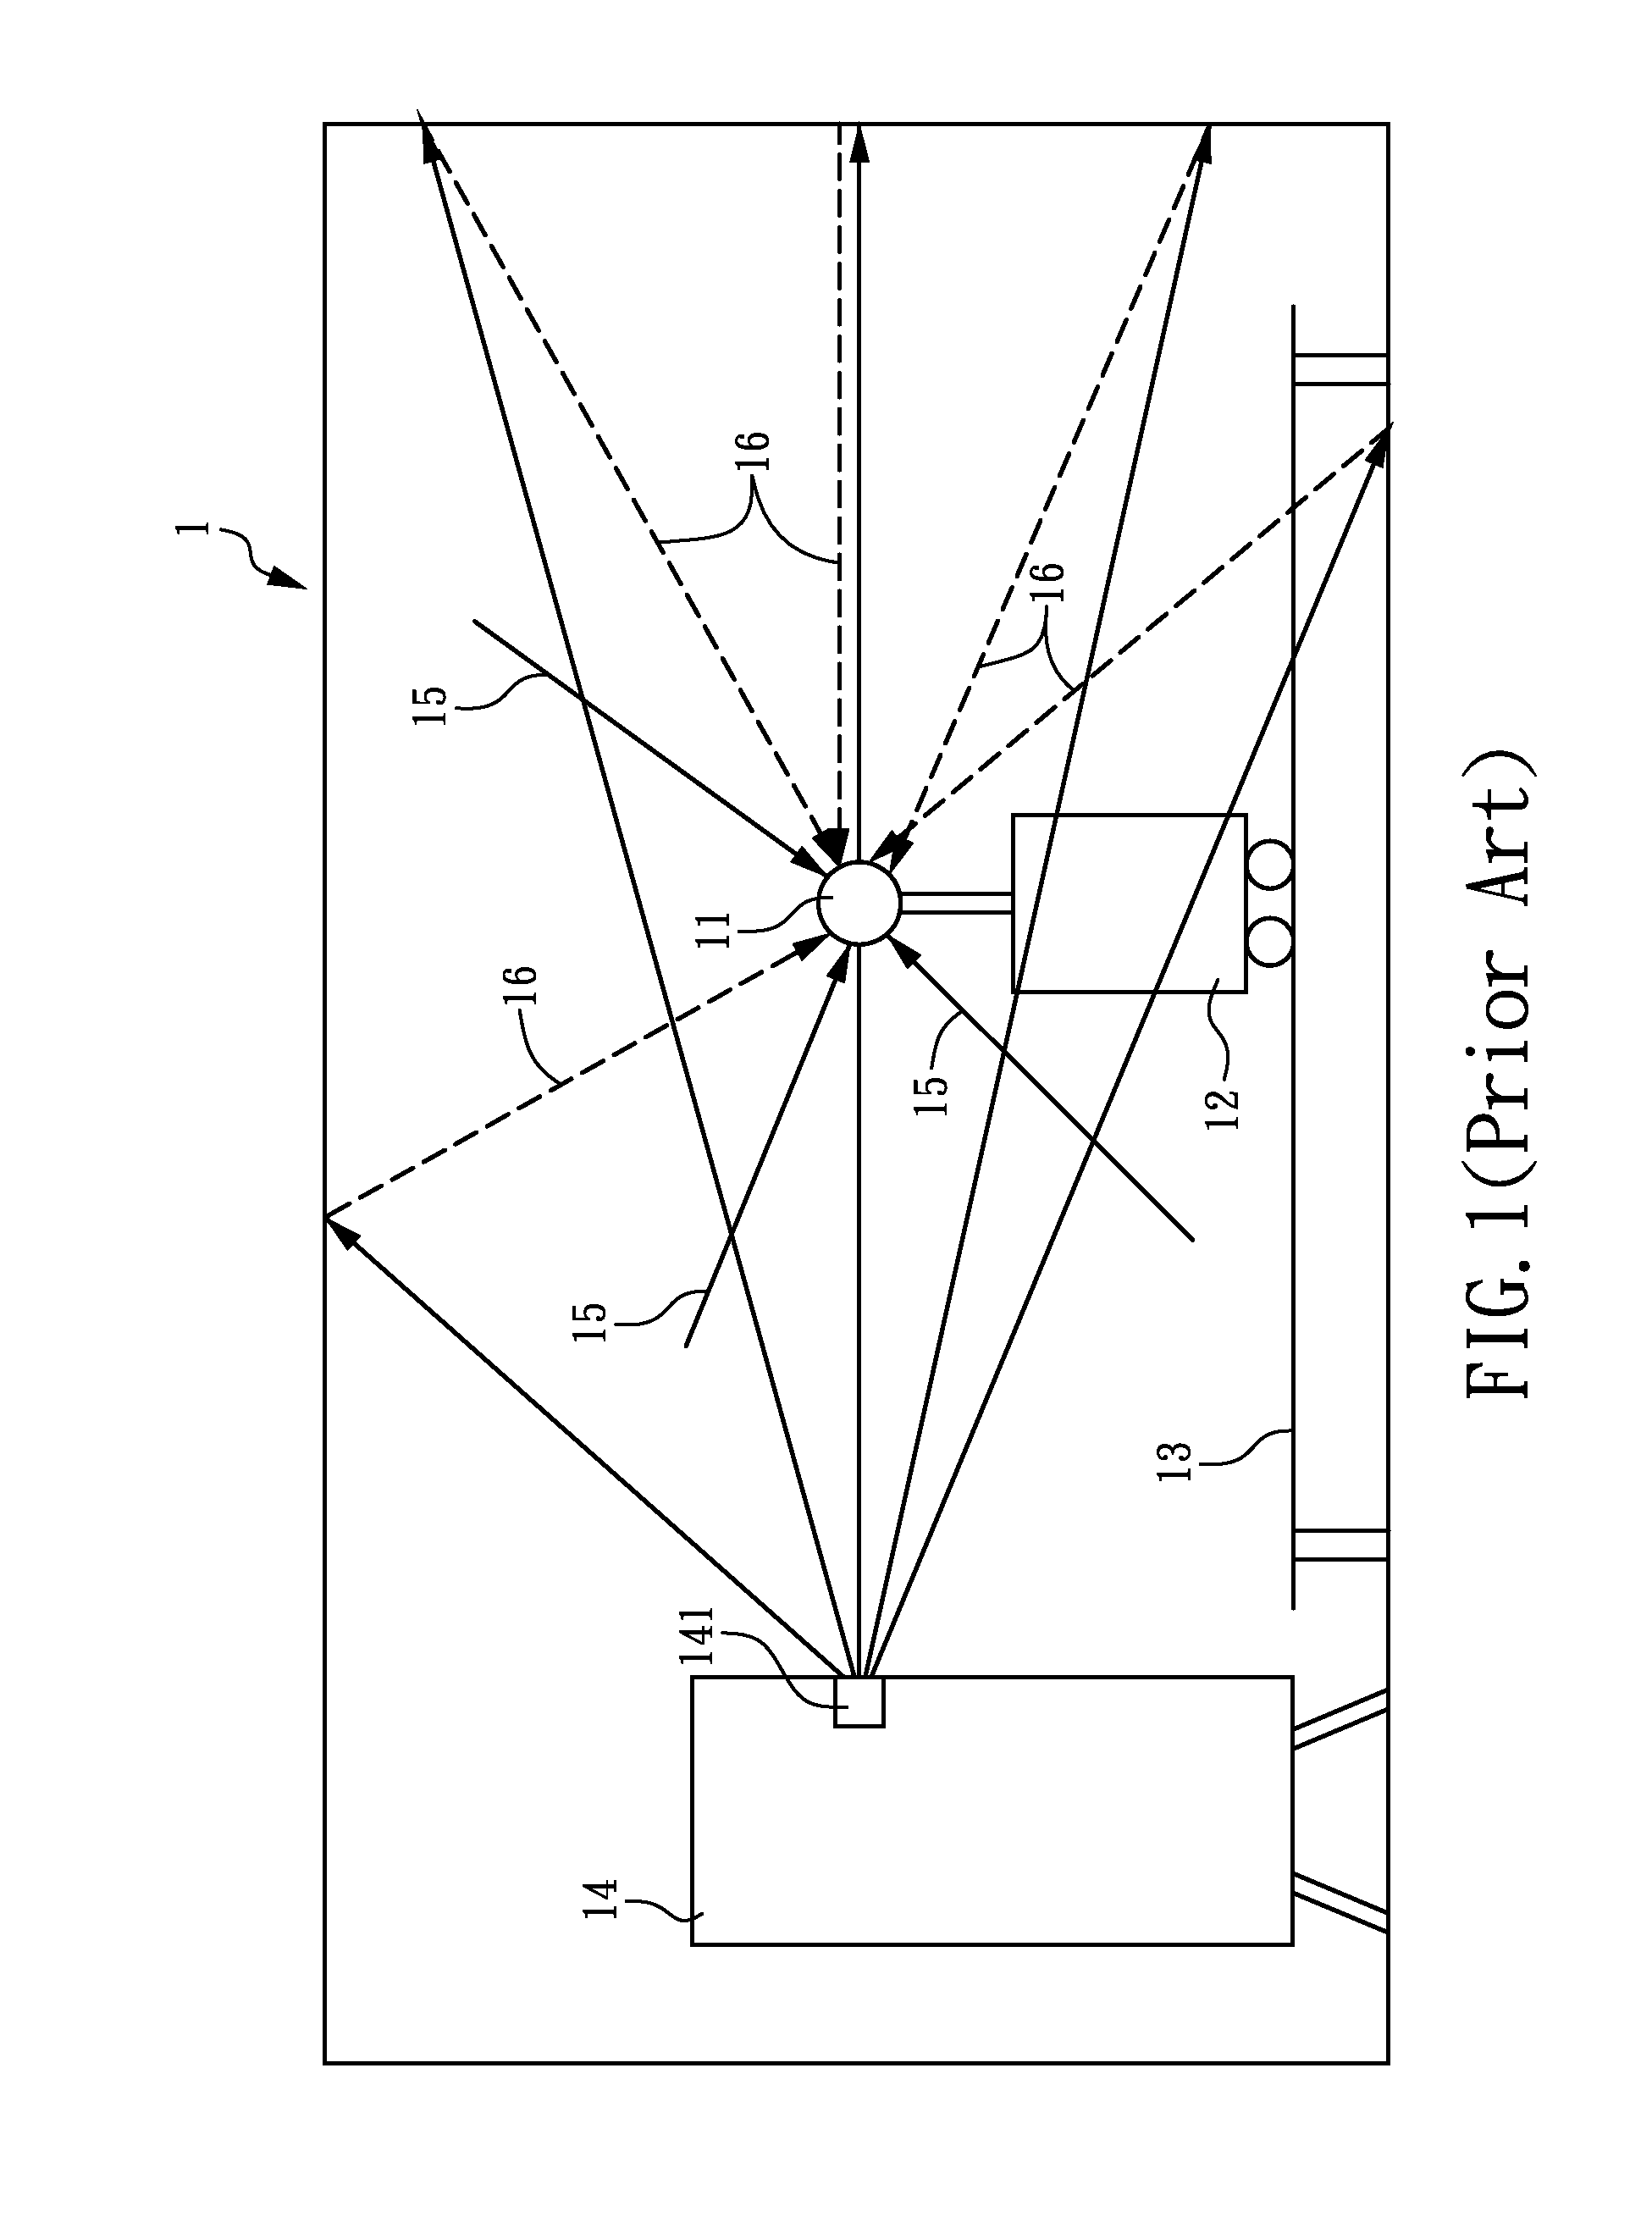 Radiation measurement instrument calibration facility capable of lowering scattered radiation and shielding background radiation